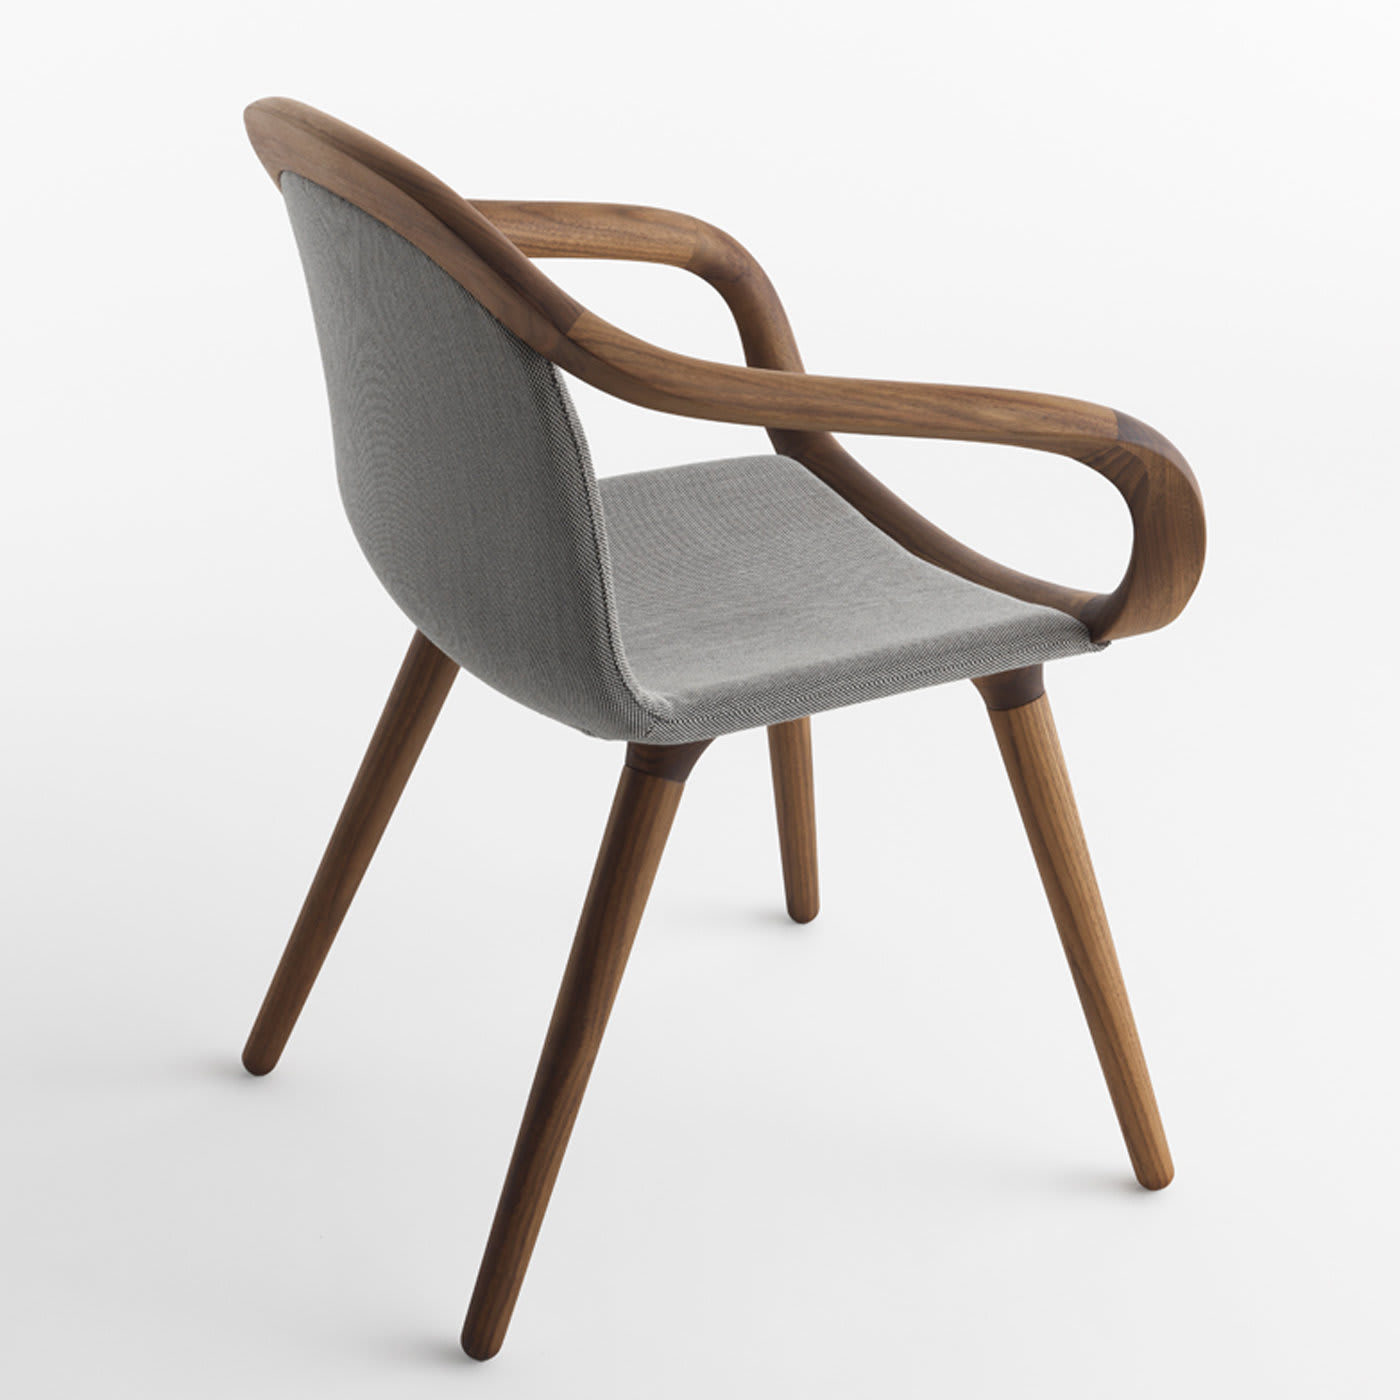 Ginevra Chair by Studio Balutto - Horm